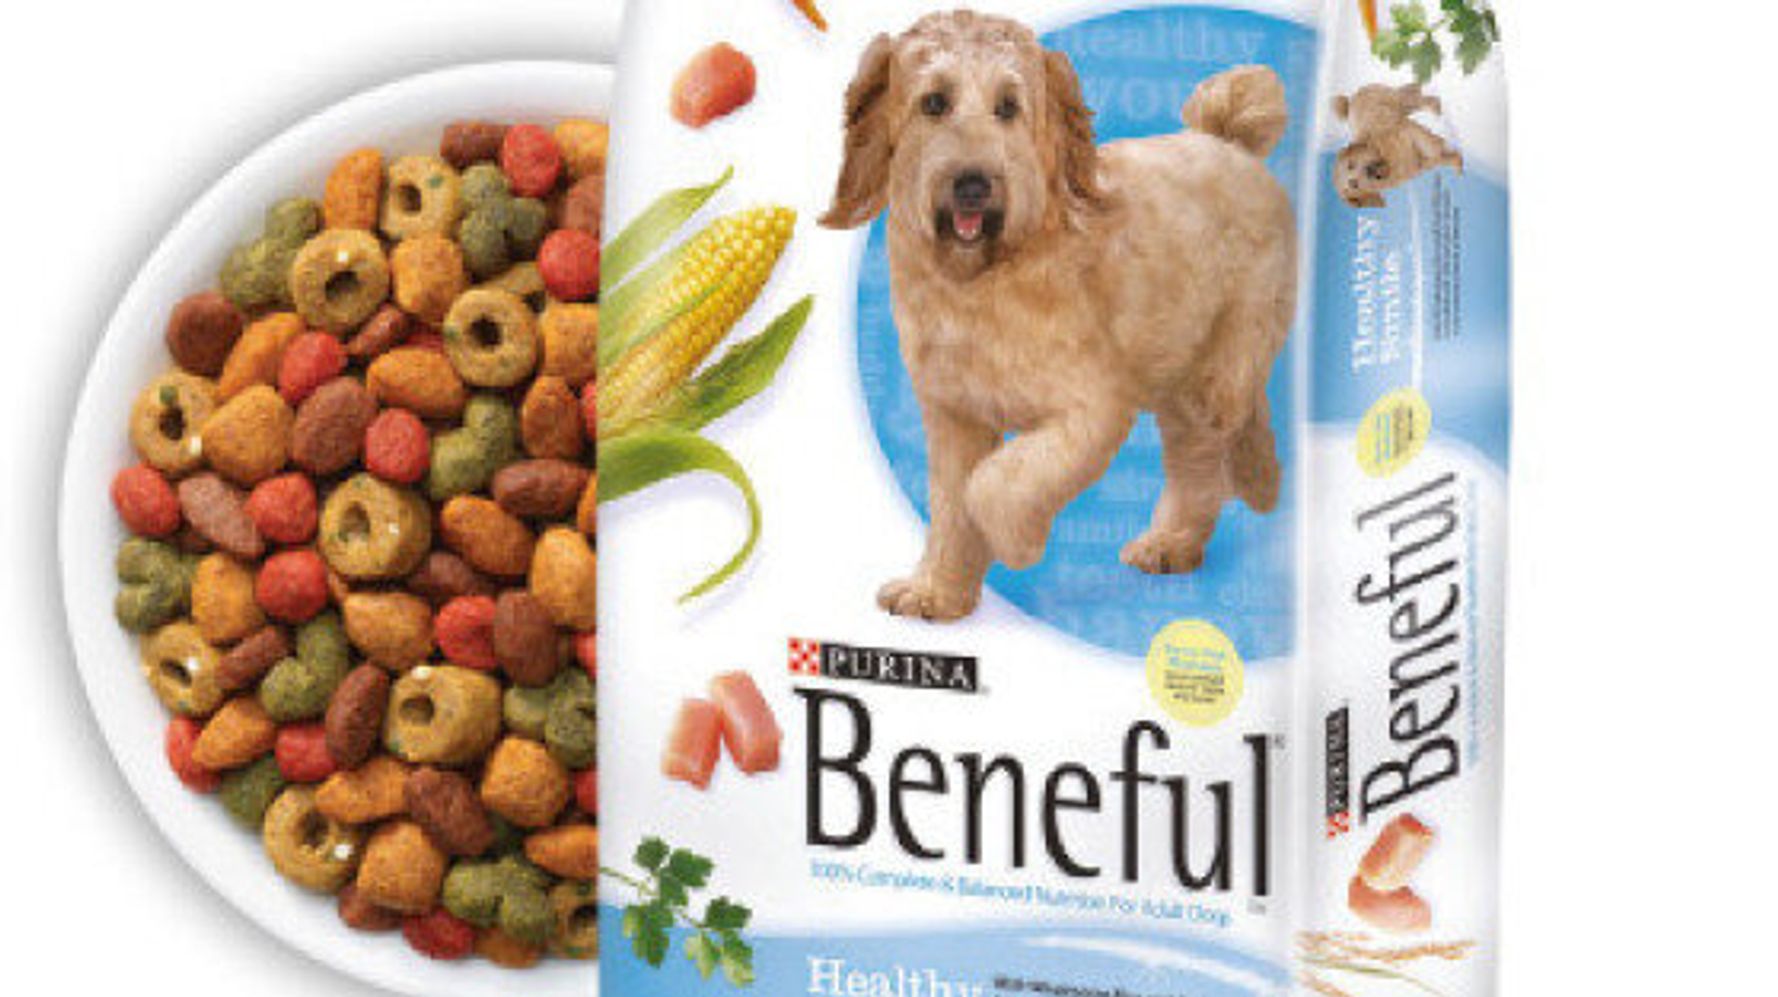 Why Is Purina Beneful Killing Dogs